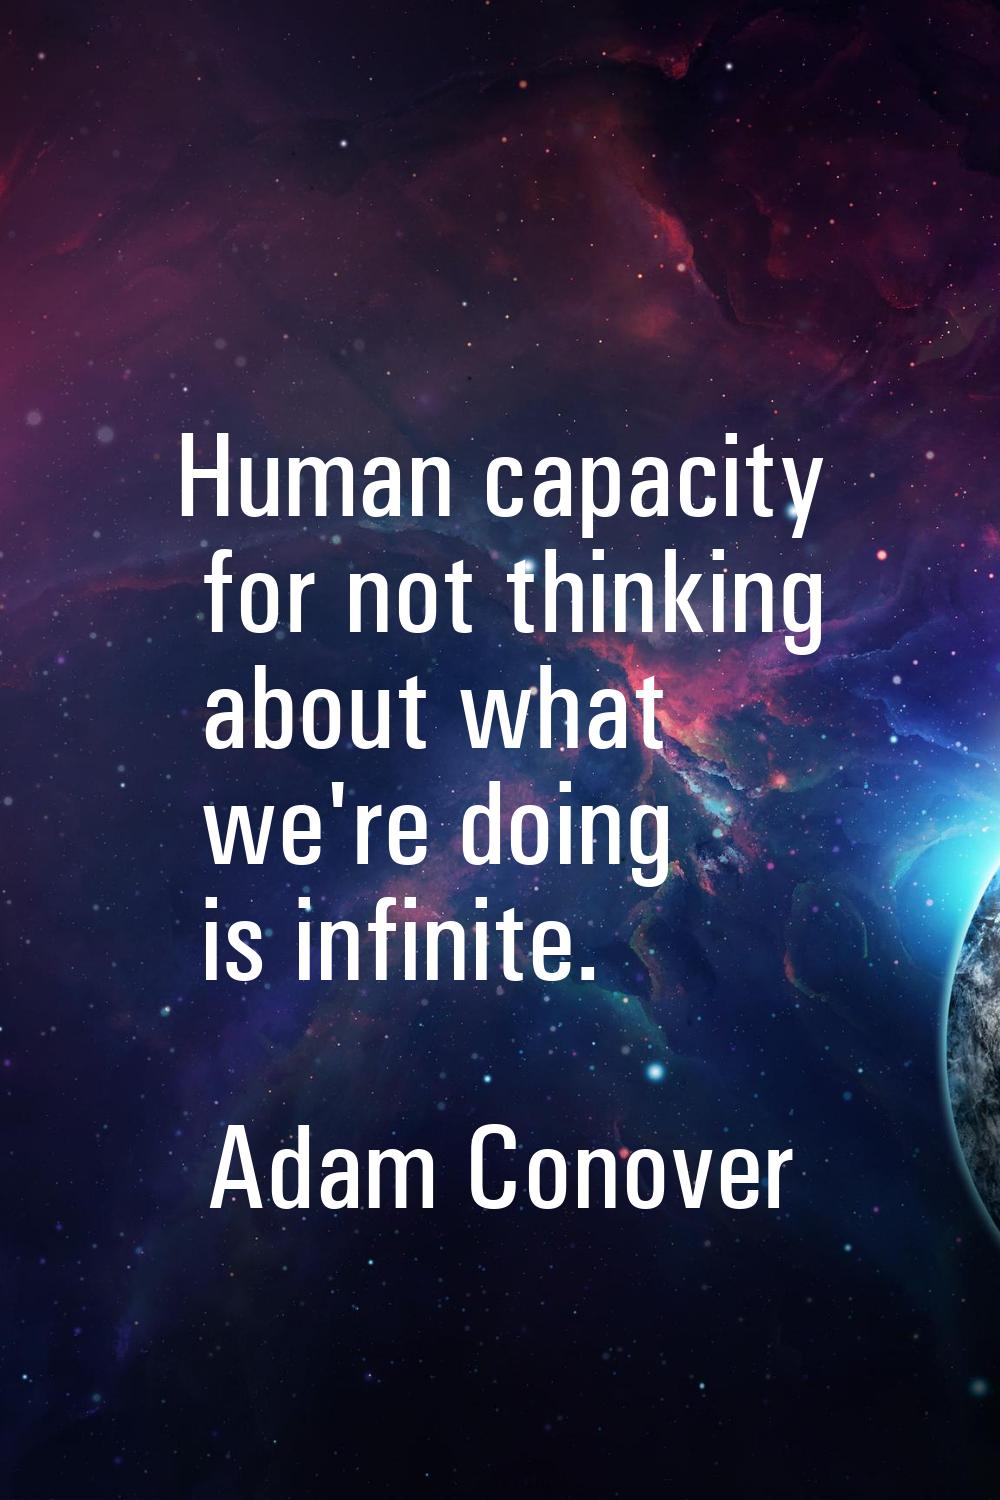 Human capacity for not thinking about what we're doing is infinite.